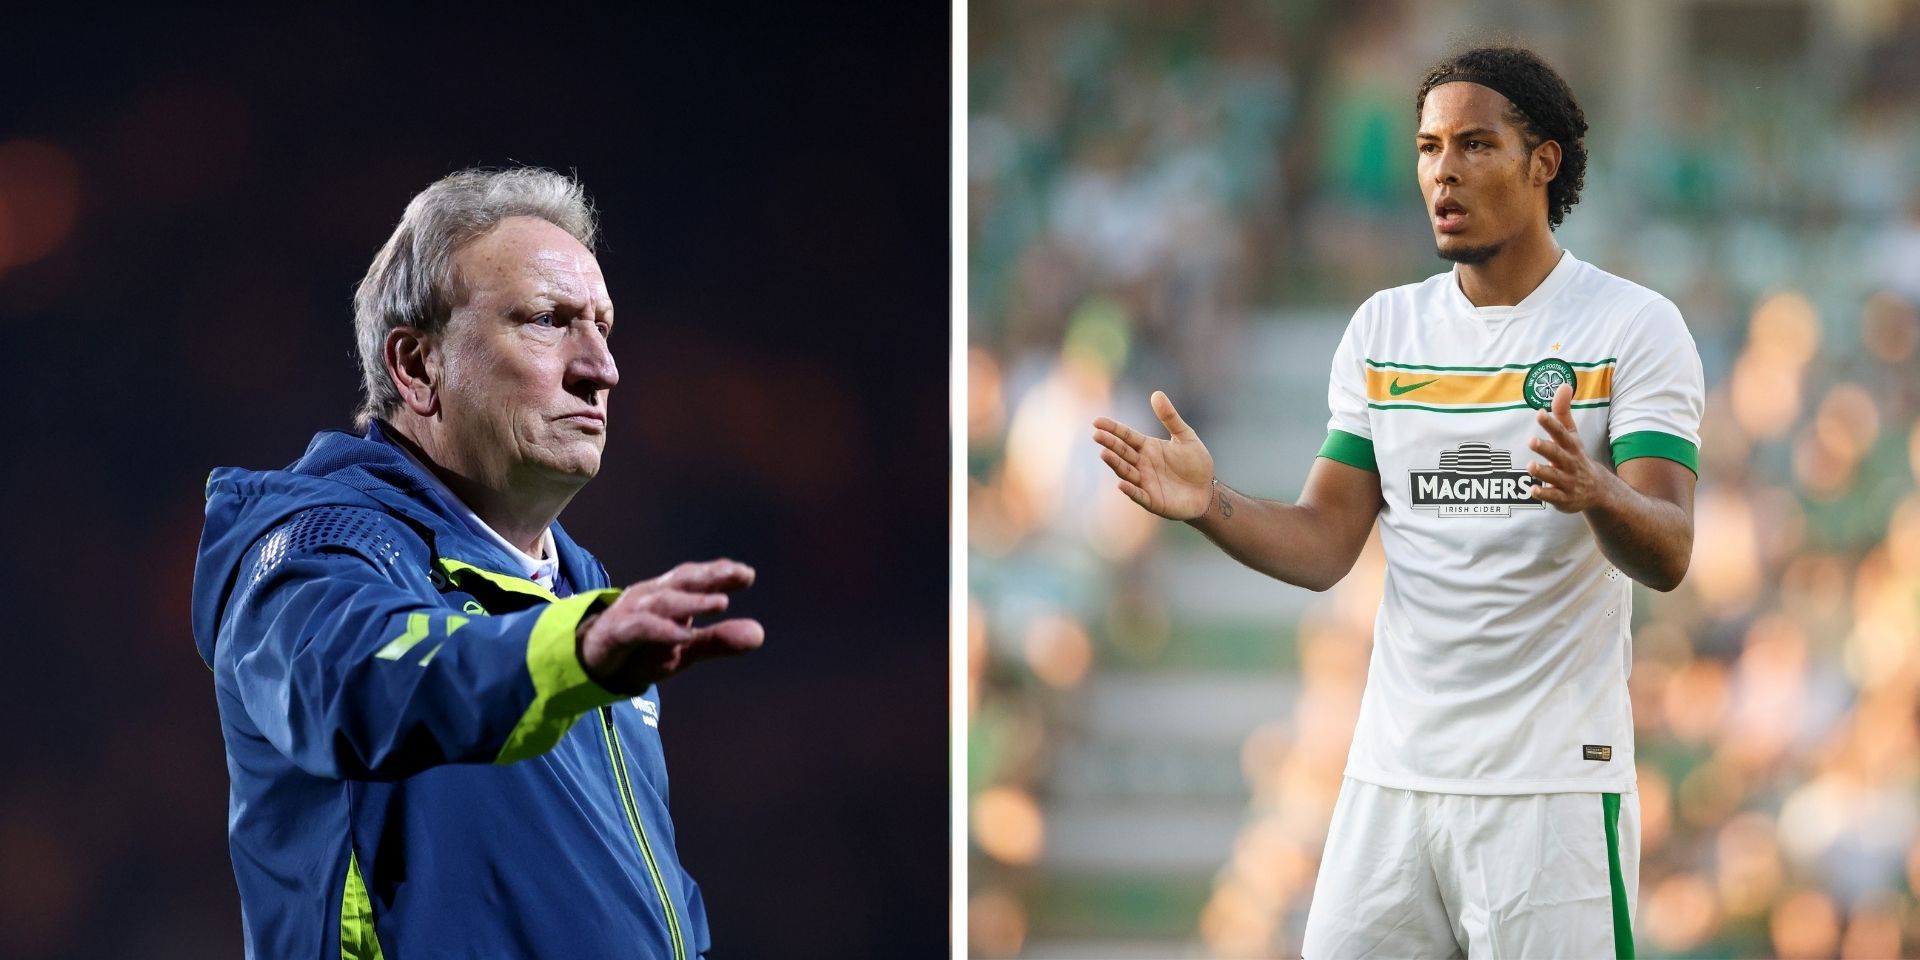 Neil Warnock on ‘the one that got away’ Virgil van Dijk who he turned down ‘for £5 million’ because he was ‘too slow’